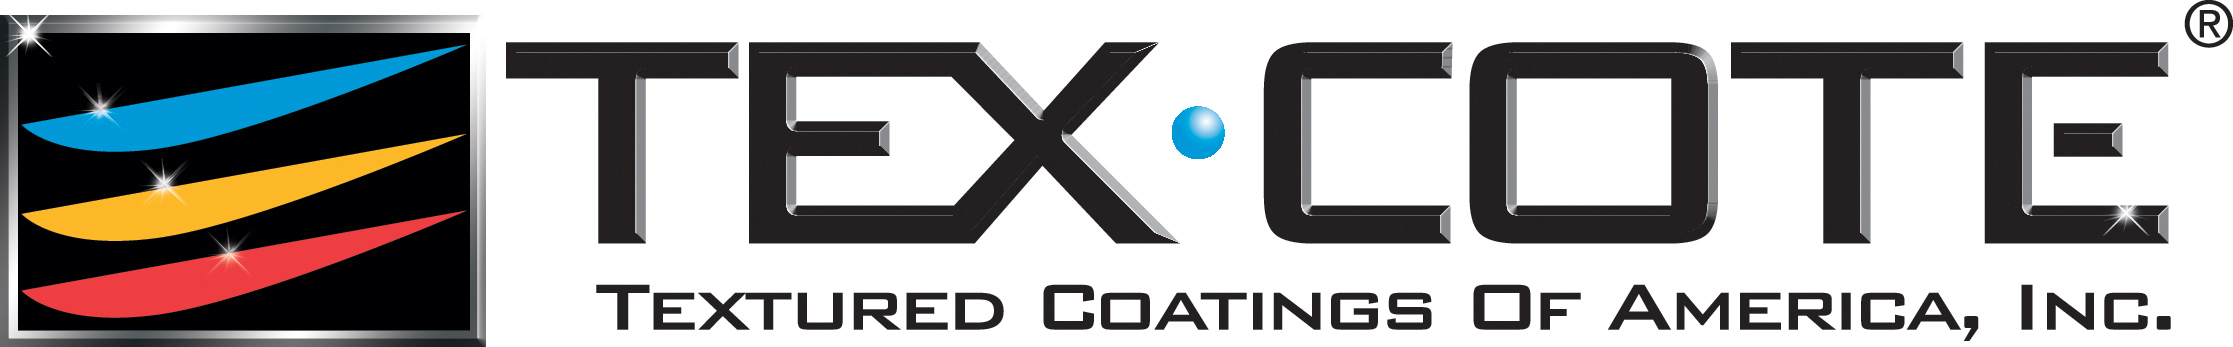 TEX•COTE® COOLWALL® systems logo